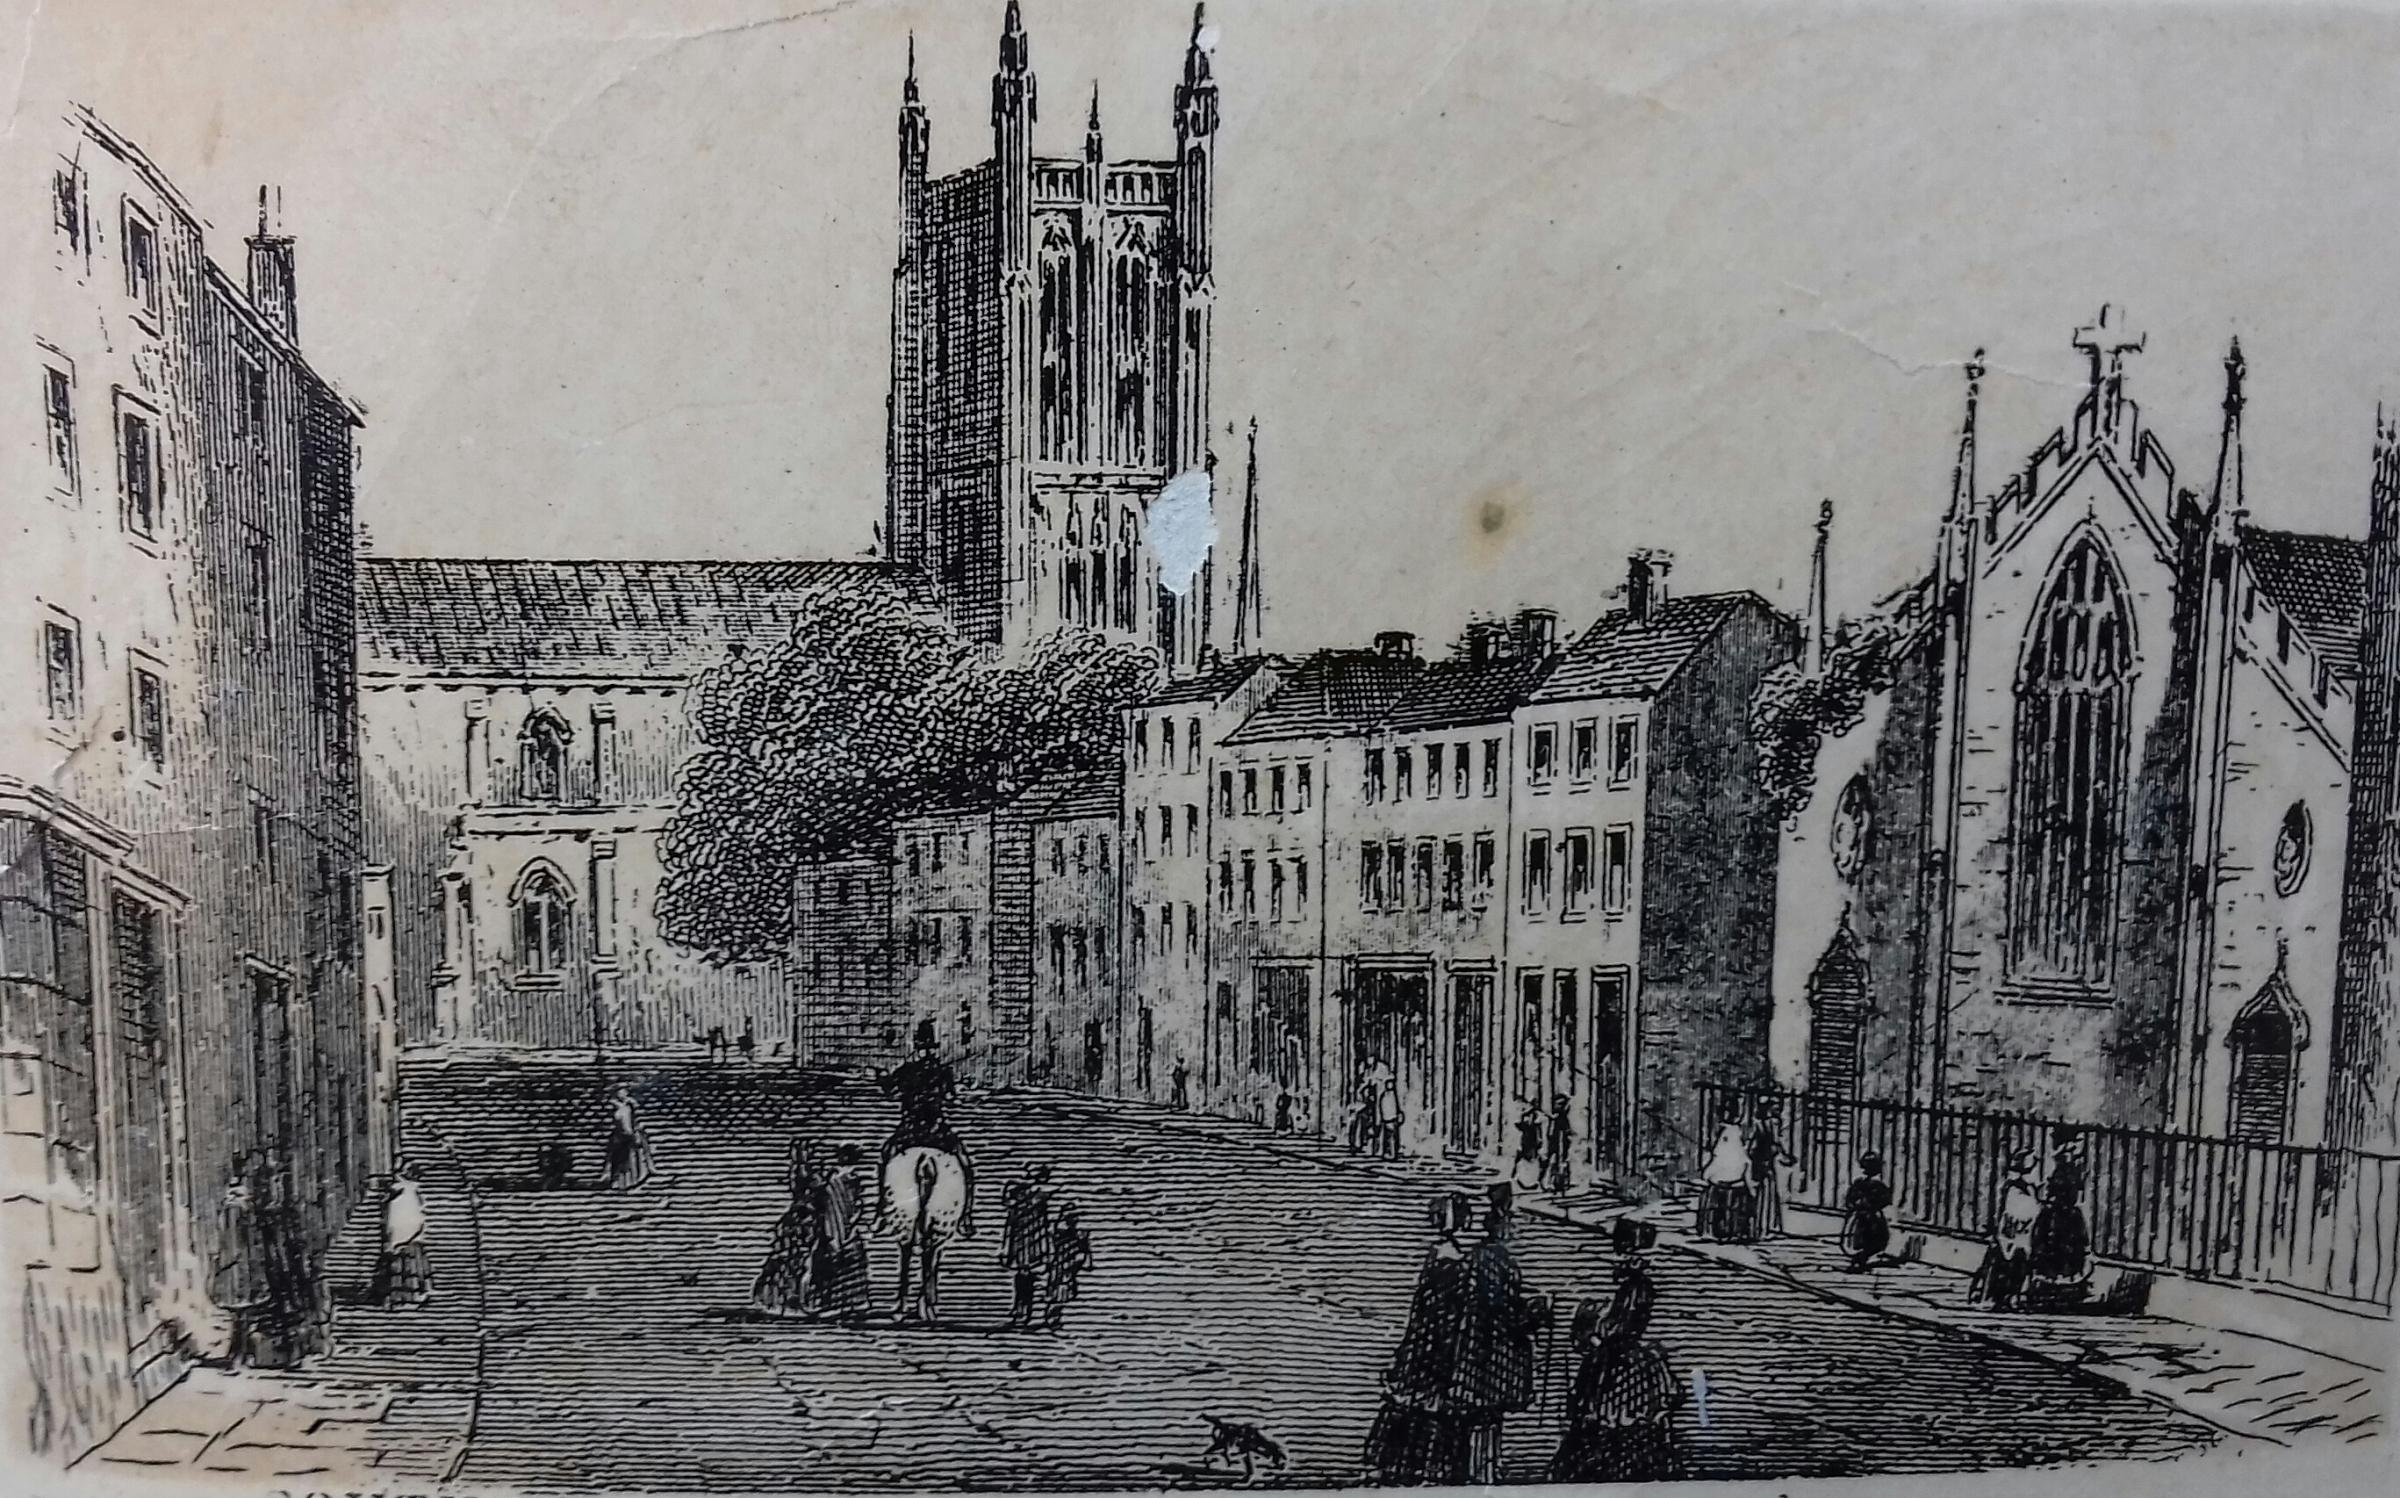 An early litho print of the Cathedral end of High Street showing St Helen’s church. The Cocks family, a descendent of which built Eastnor Castle, lived in one of the houses opposite